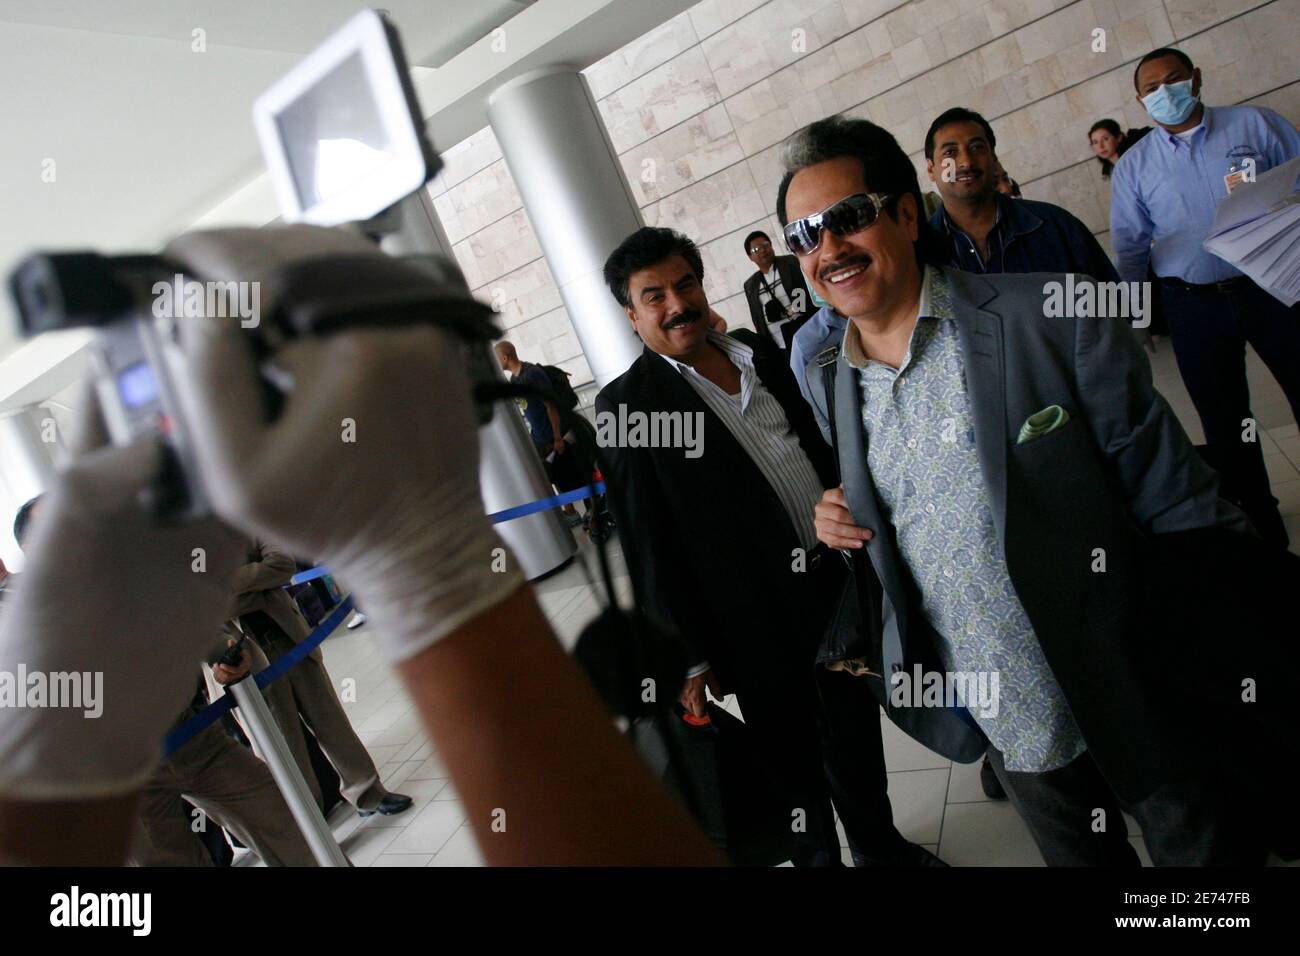 Mexican Hernan Hernandez, member of the 'Los Tigres del Norte' music group, is scanned for influenza A (H1N1), formerly referred to as swine flu, through a thermal camera to detect possible alterations in his body temperature upon his arrival at Toncontin airport in Tegucigalpa, April 30, 2009. The World Health Organisation (WHO), bowing to pressure from meat industry producers and concerned governments, said on Thursday it would refer to a deadly new virus strain as influenza A (H1N1), not swine flu.    REUTERS/Edgard Garrido   (HONDURAS HEALTH) Stock Photo